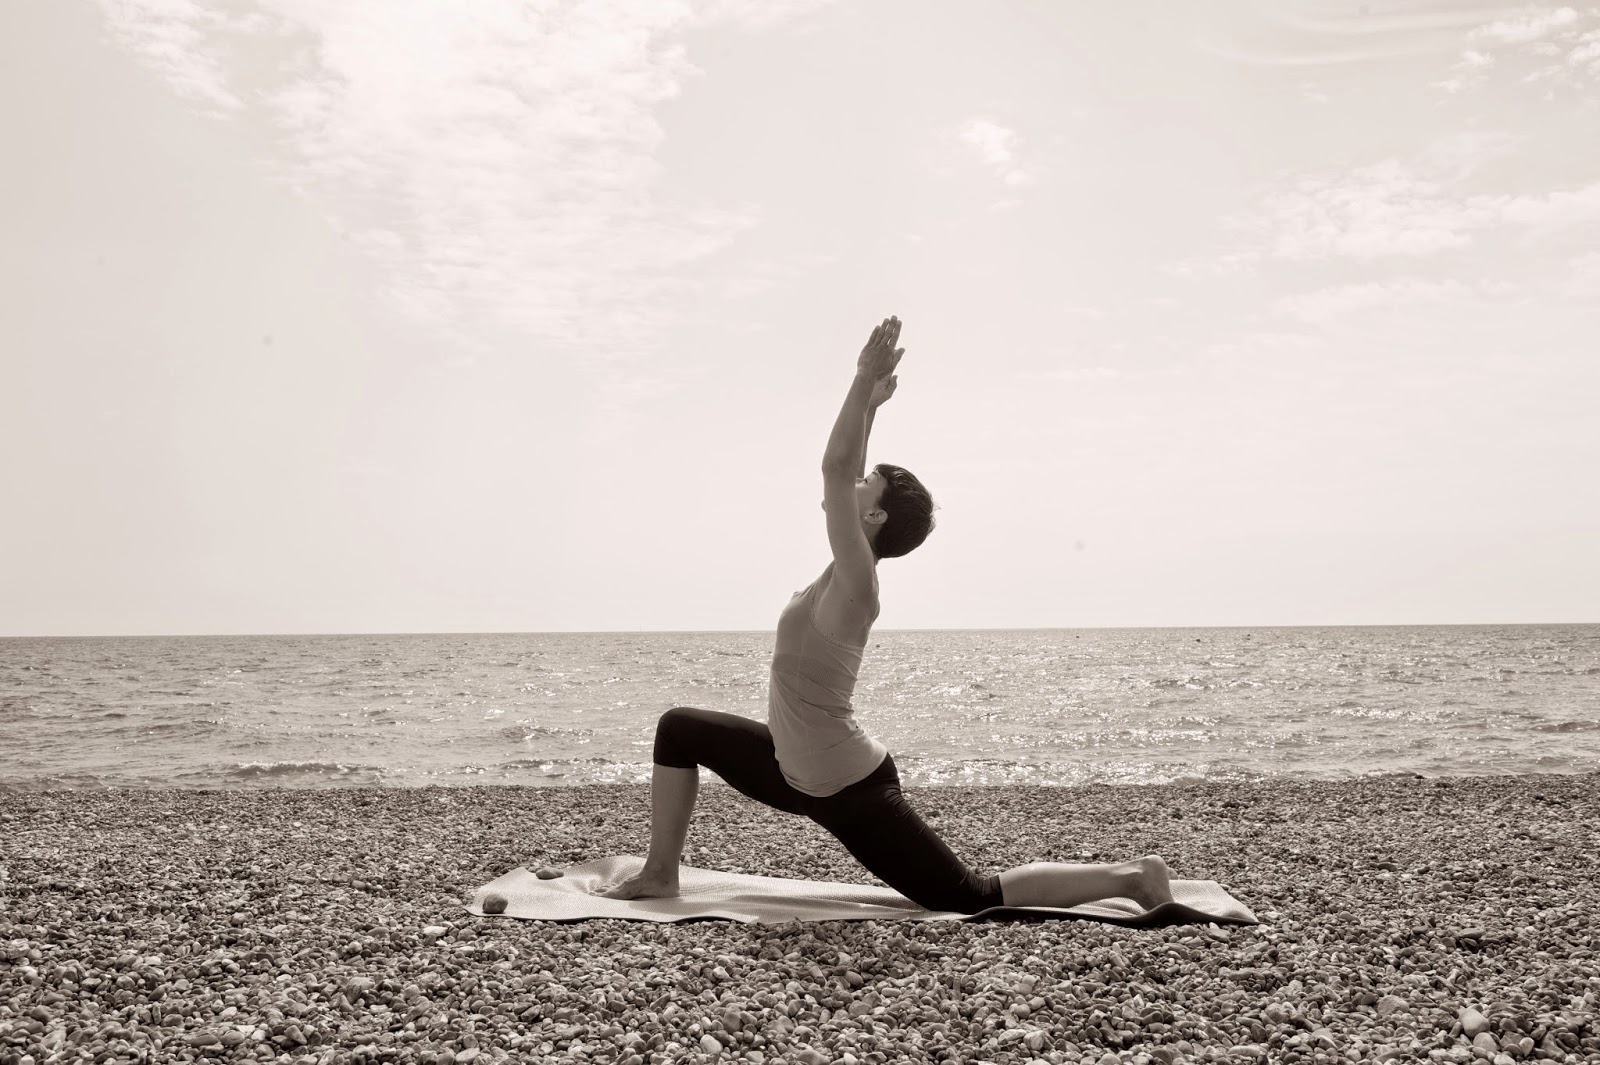 Win a six week yoga course in Brighton & Hove worth £60